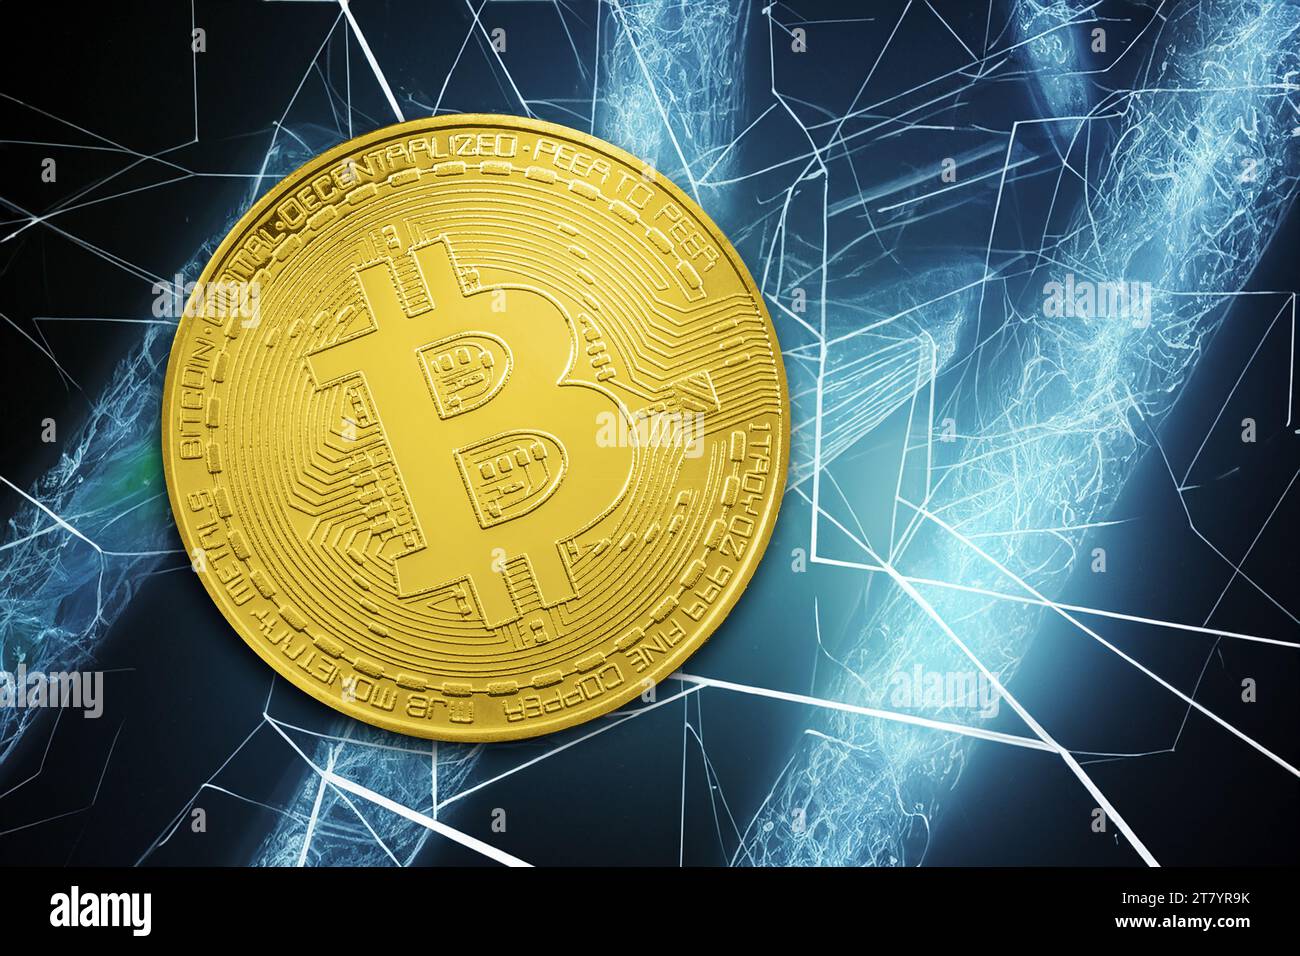 Bitcoin cryptocurrency metal coin, decentralized international currency payment system. Figurative representation of virtual currency. Stock Photo